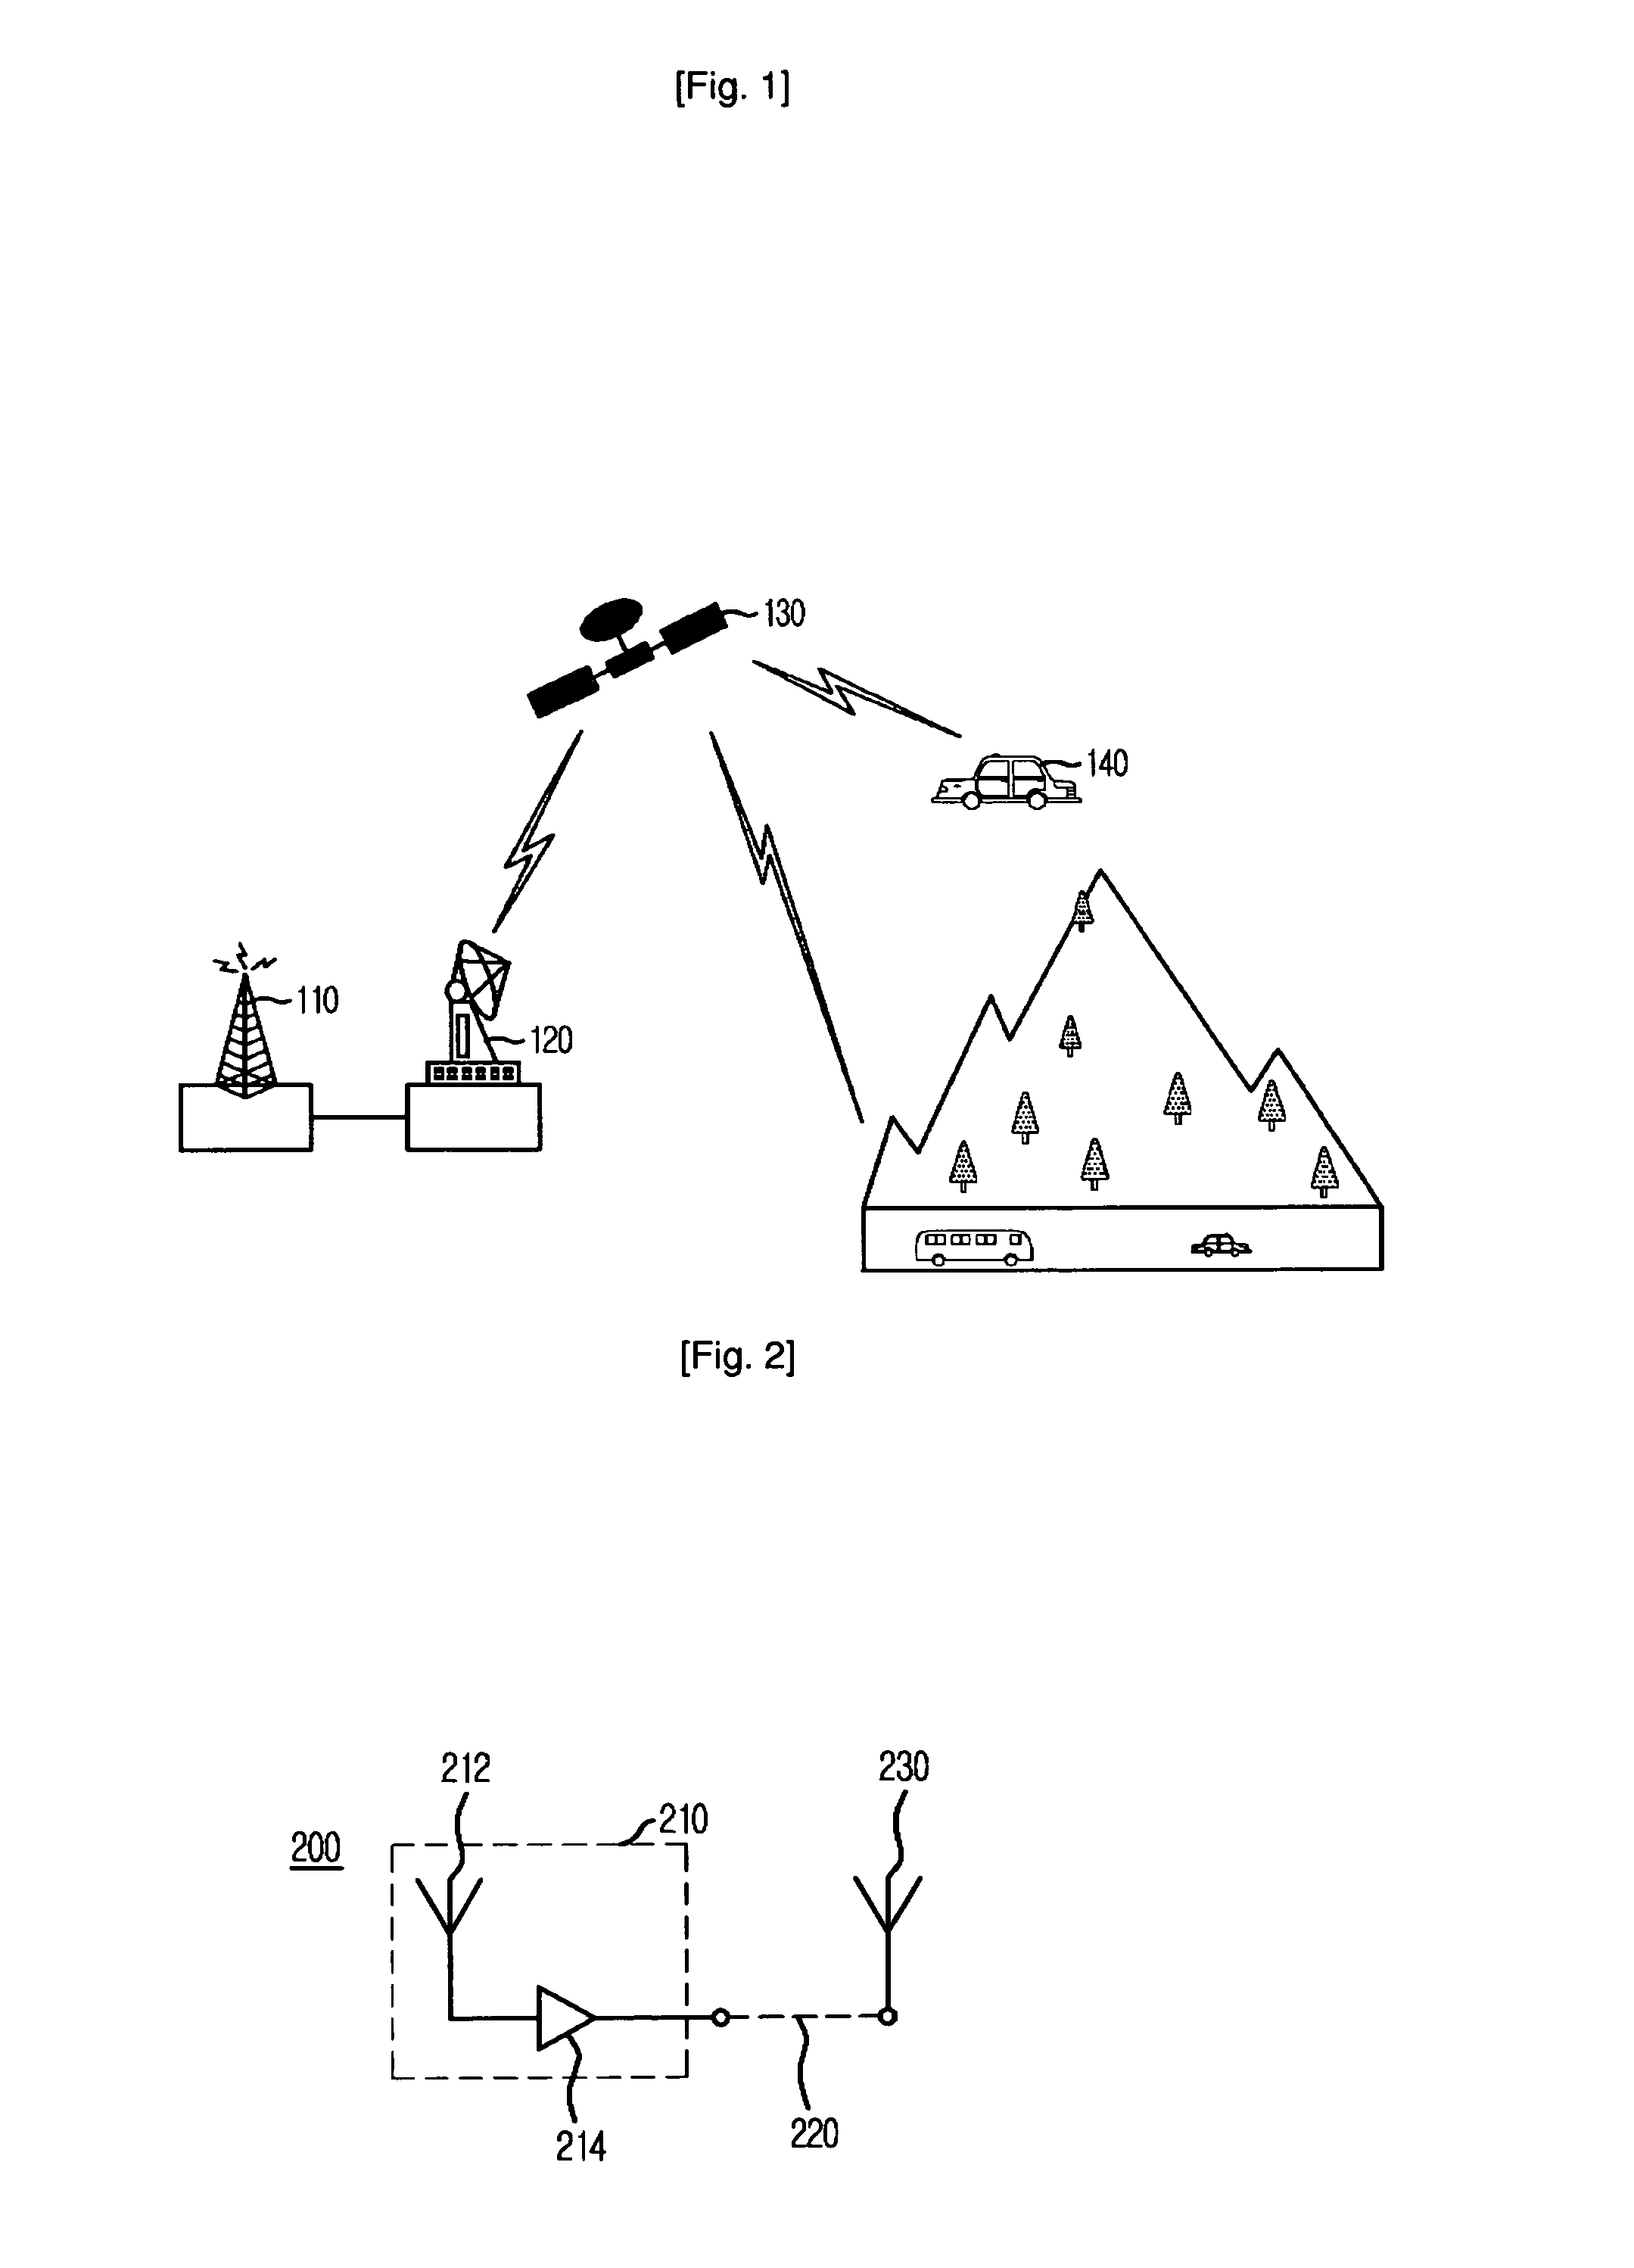 Apparatus for repeating signal using microstrip patch array antenna